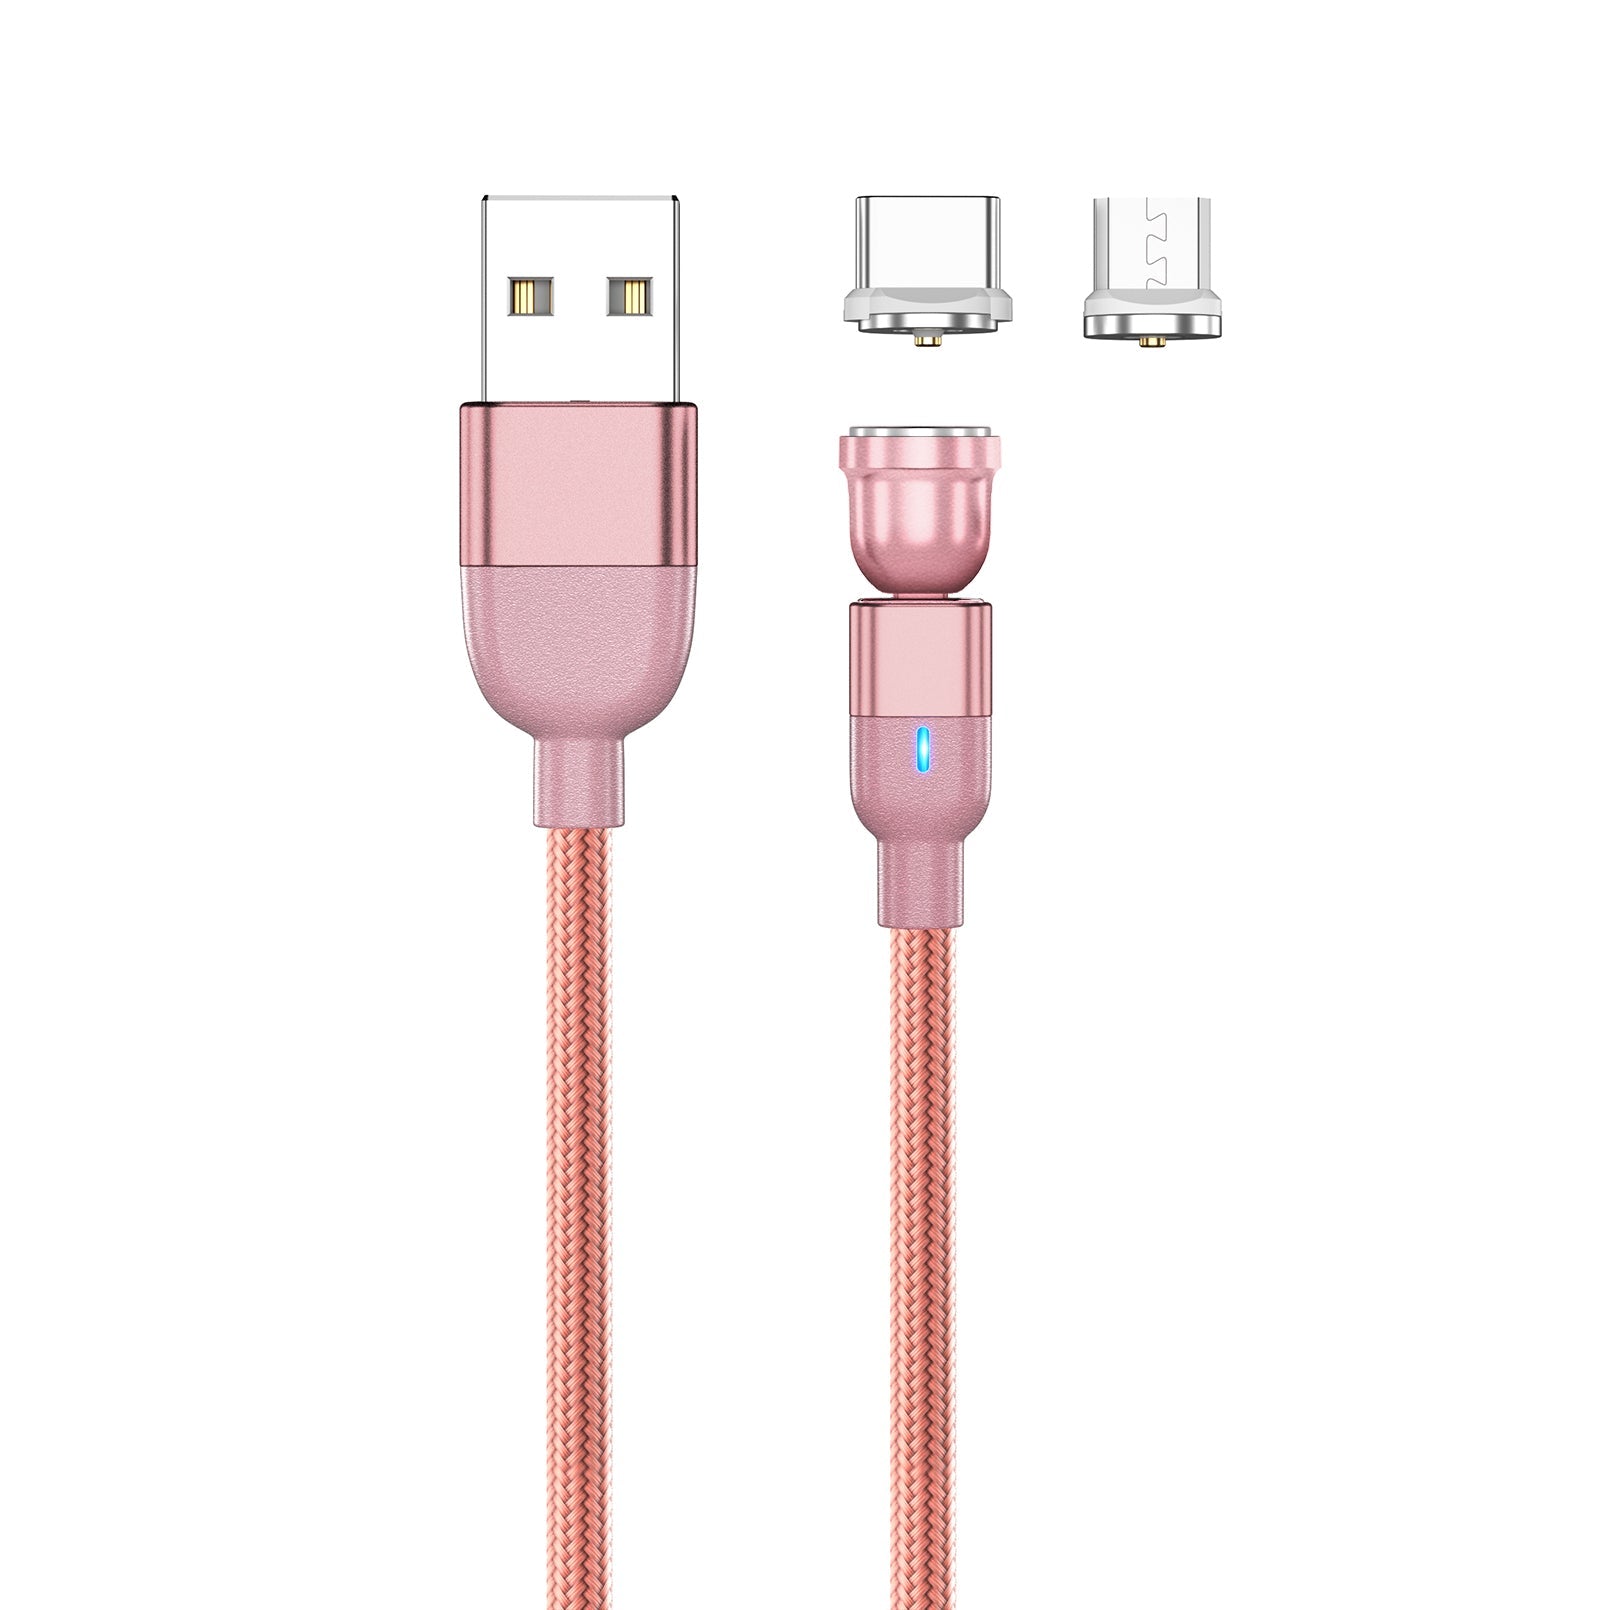 MINISO 2 IN 1 MAGNETIC CHARGING CABLE, 540° ROTATION(ROSE GOLD) 2011821412109 TYPE-C CHARGING CABLE